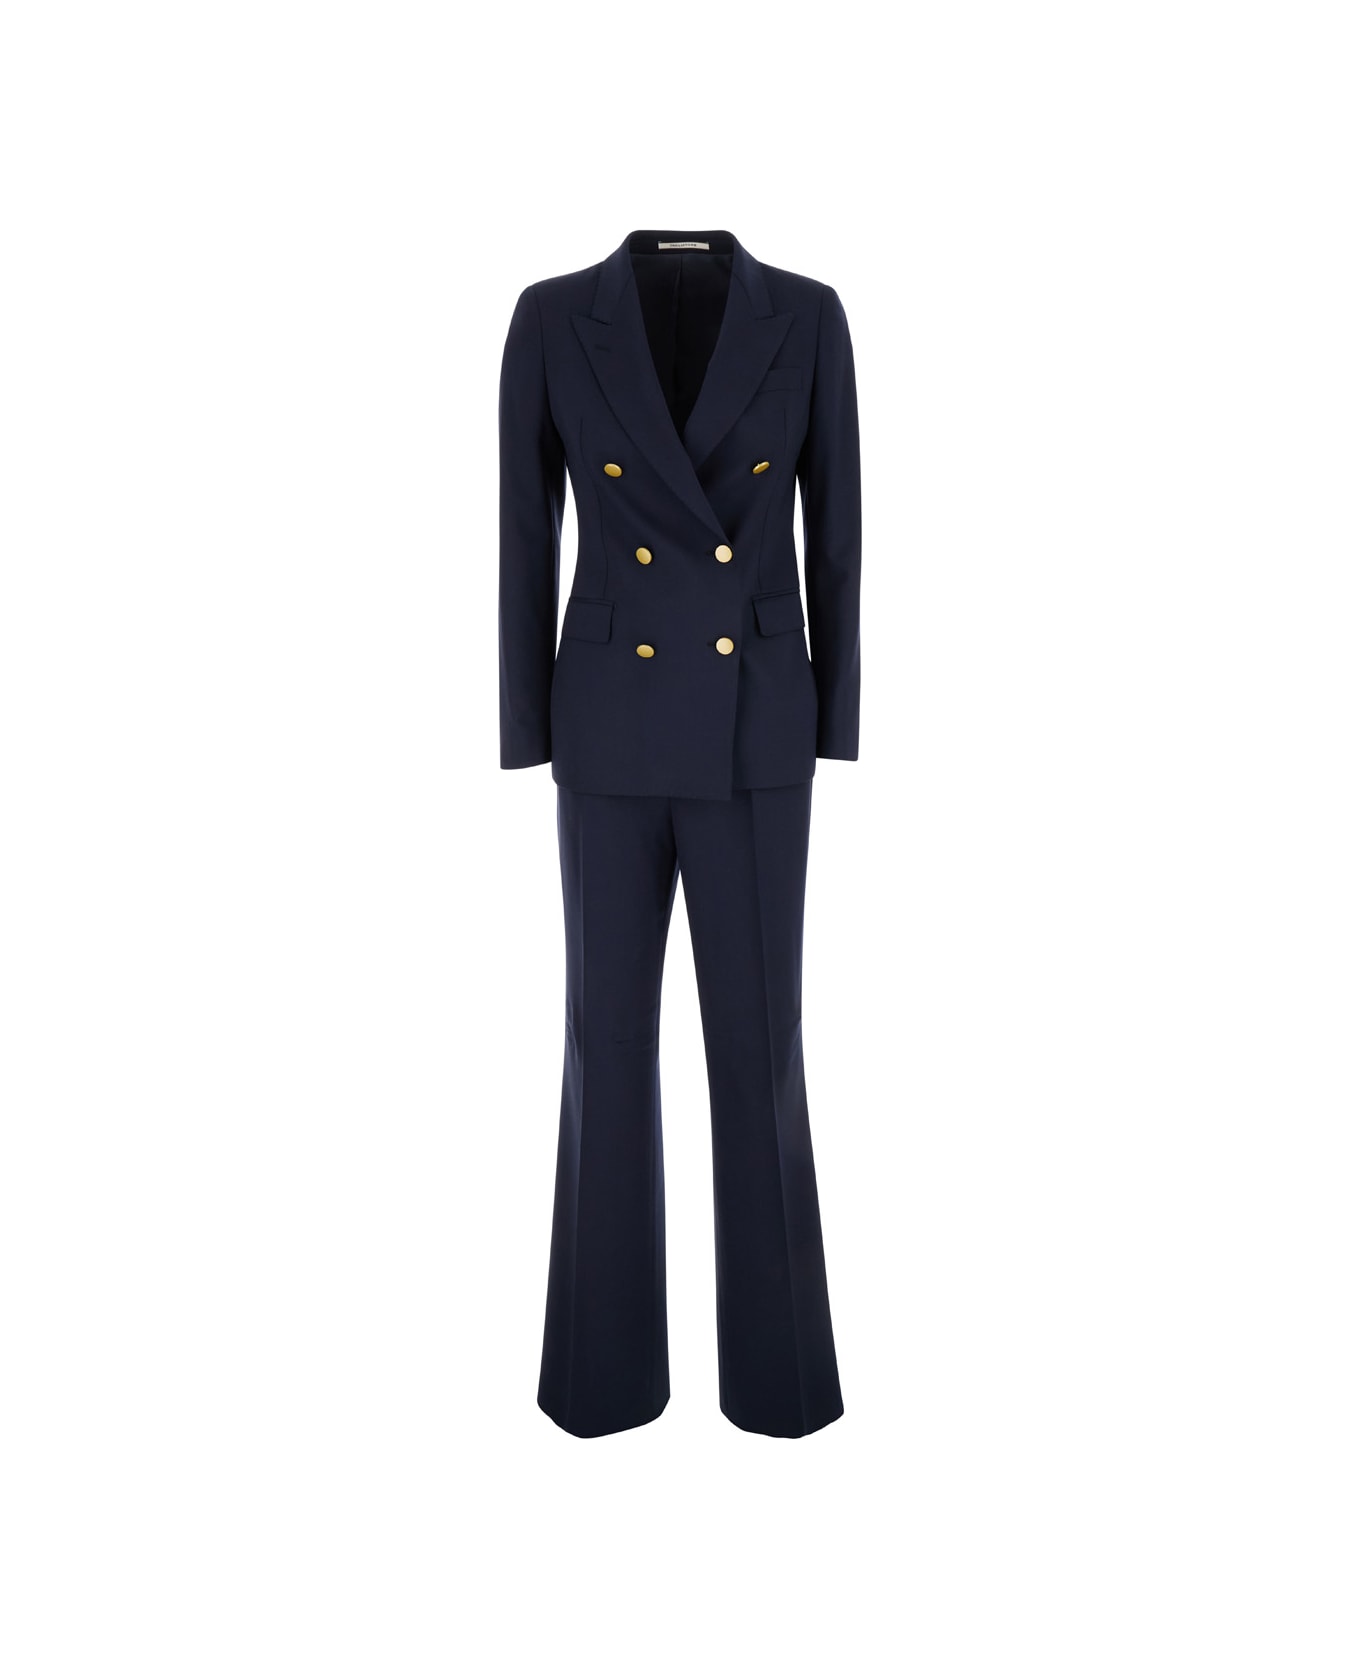 Tagliatore Blue Double-breasted Suit In Wool Blend Woman - Blu ボトムス